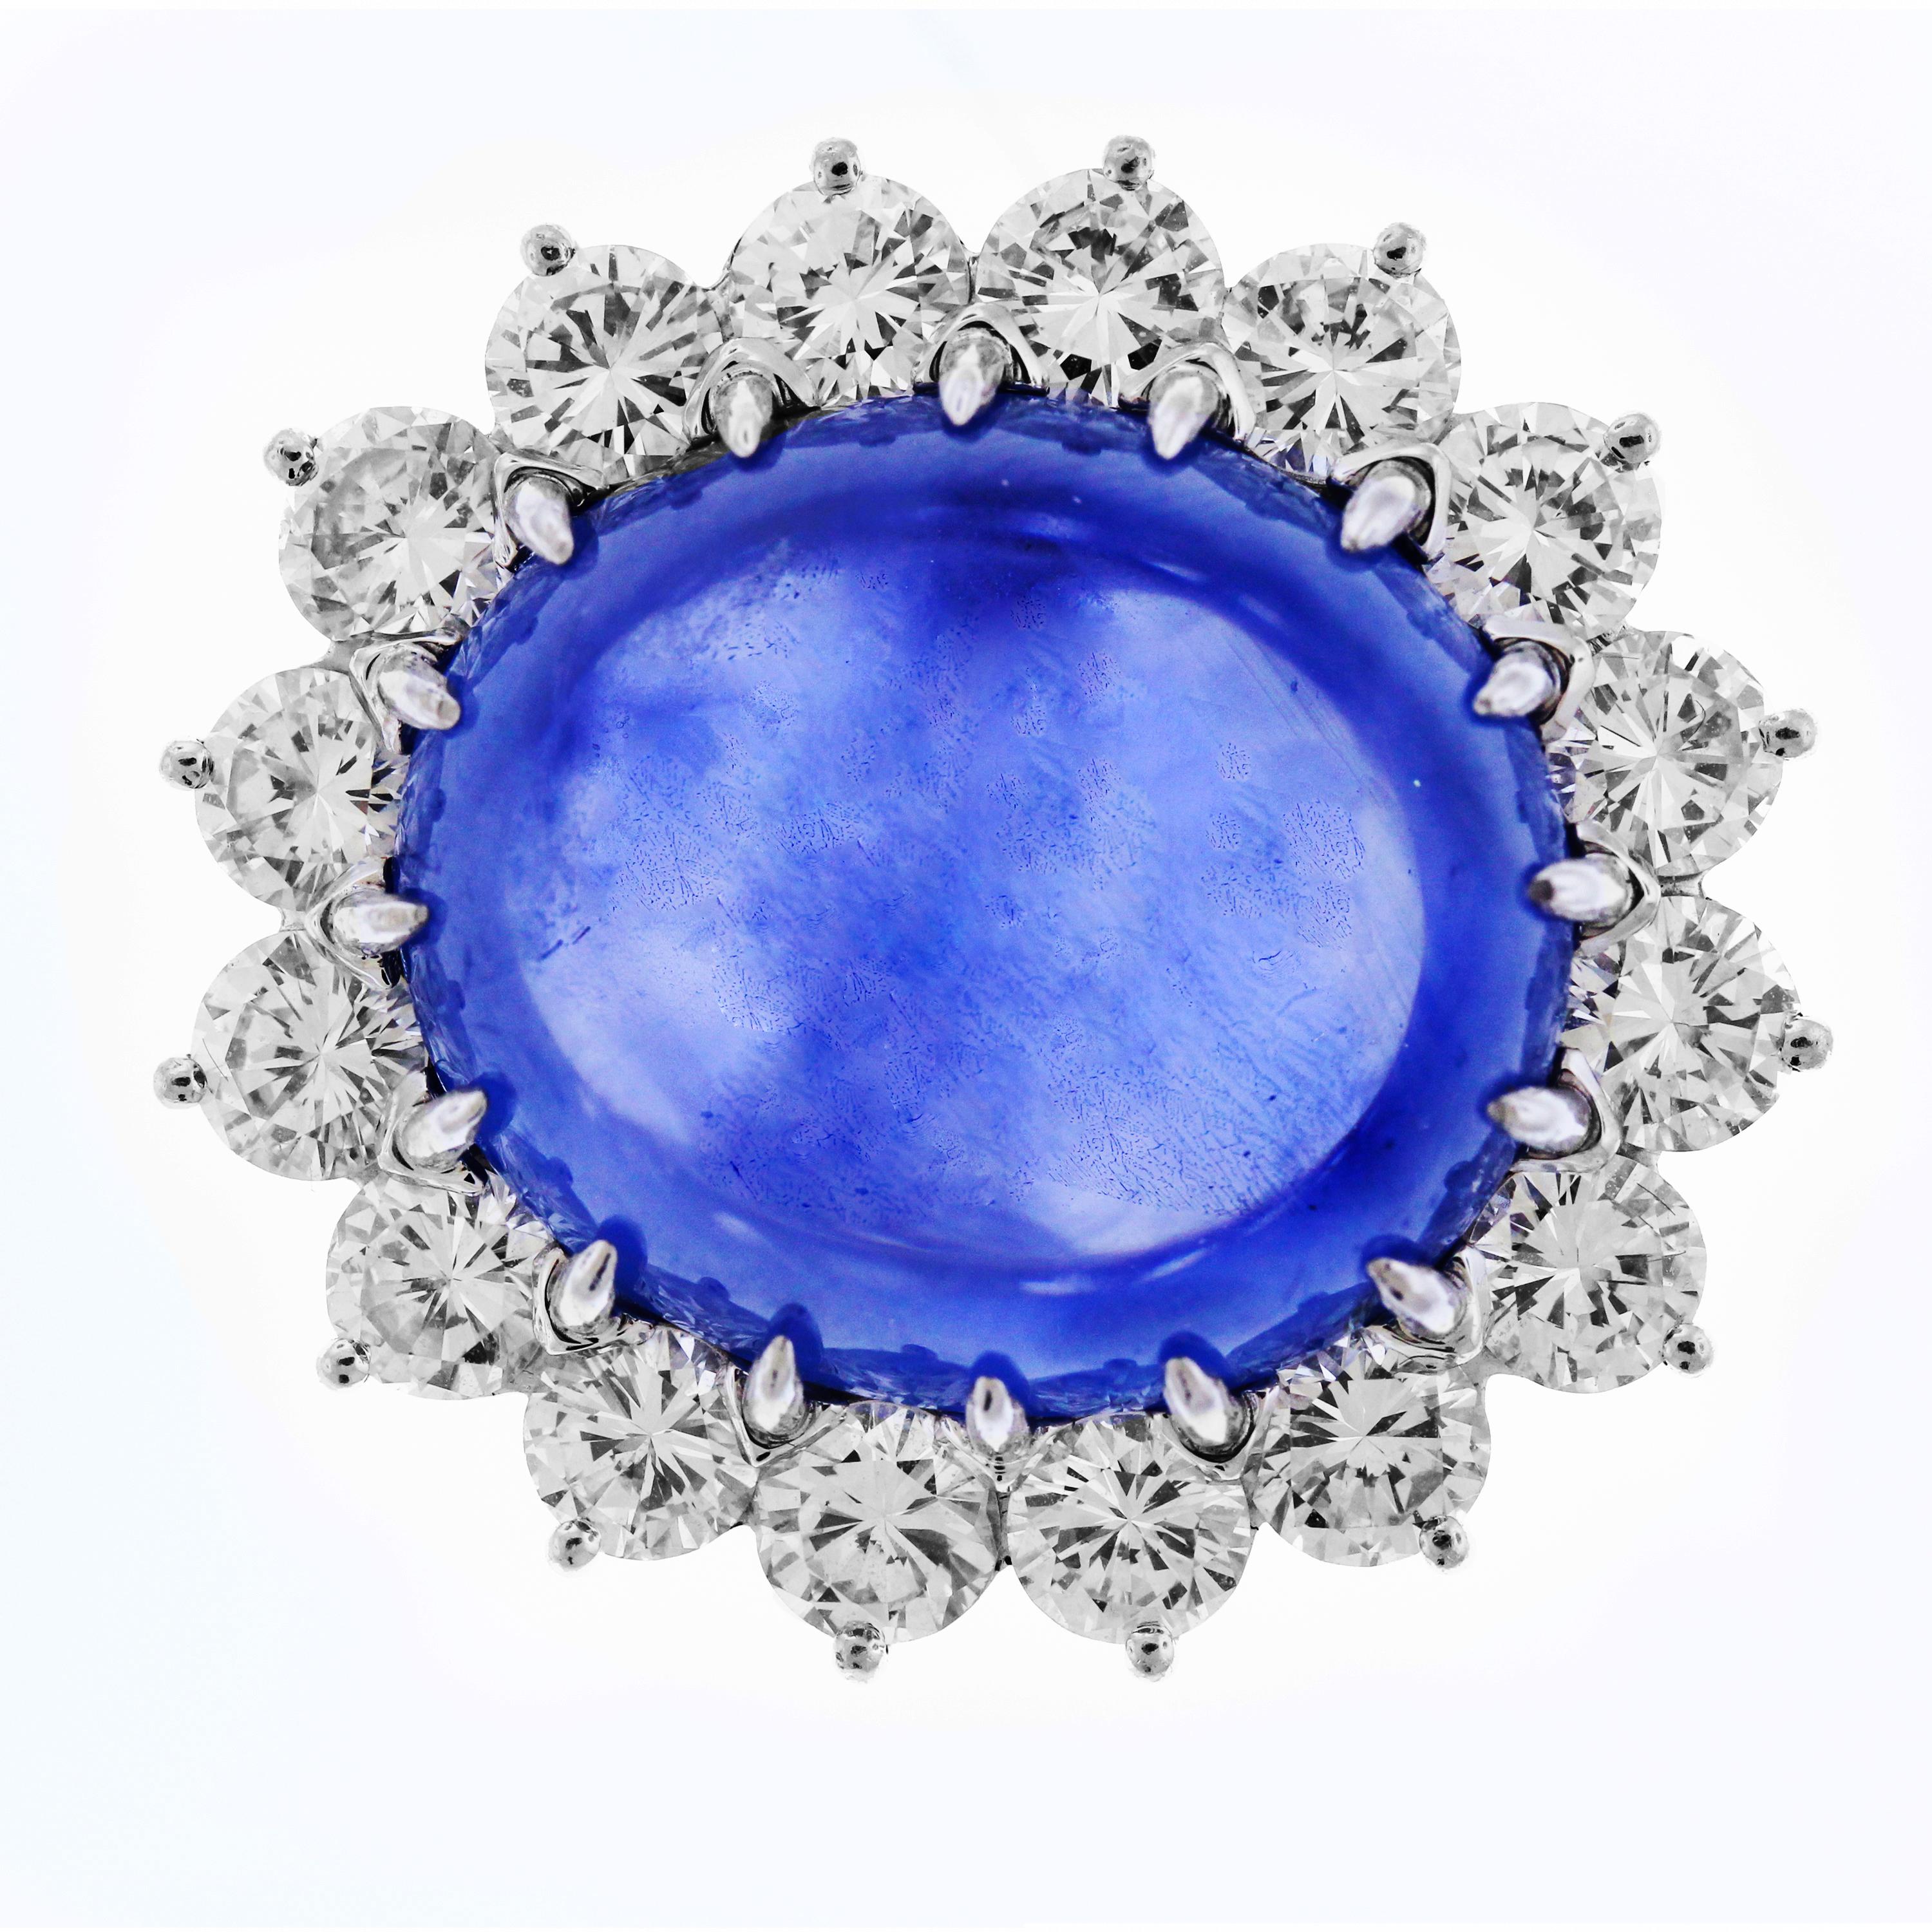 IF YOU ARE REALLY INTERESTED, CONTACT US WITH ANY REASONABLE OFFER. WE WILL TRY OUR BEST TO MAKE YOU HAPPY!

Platinum Ring with Top Quality Cabochon Sapphire center and Diamonds

This Cabochon Sapphire is truly top gem world class with truly